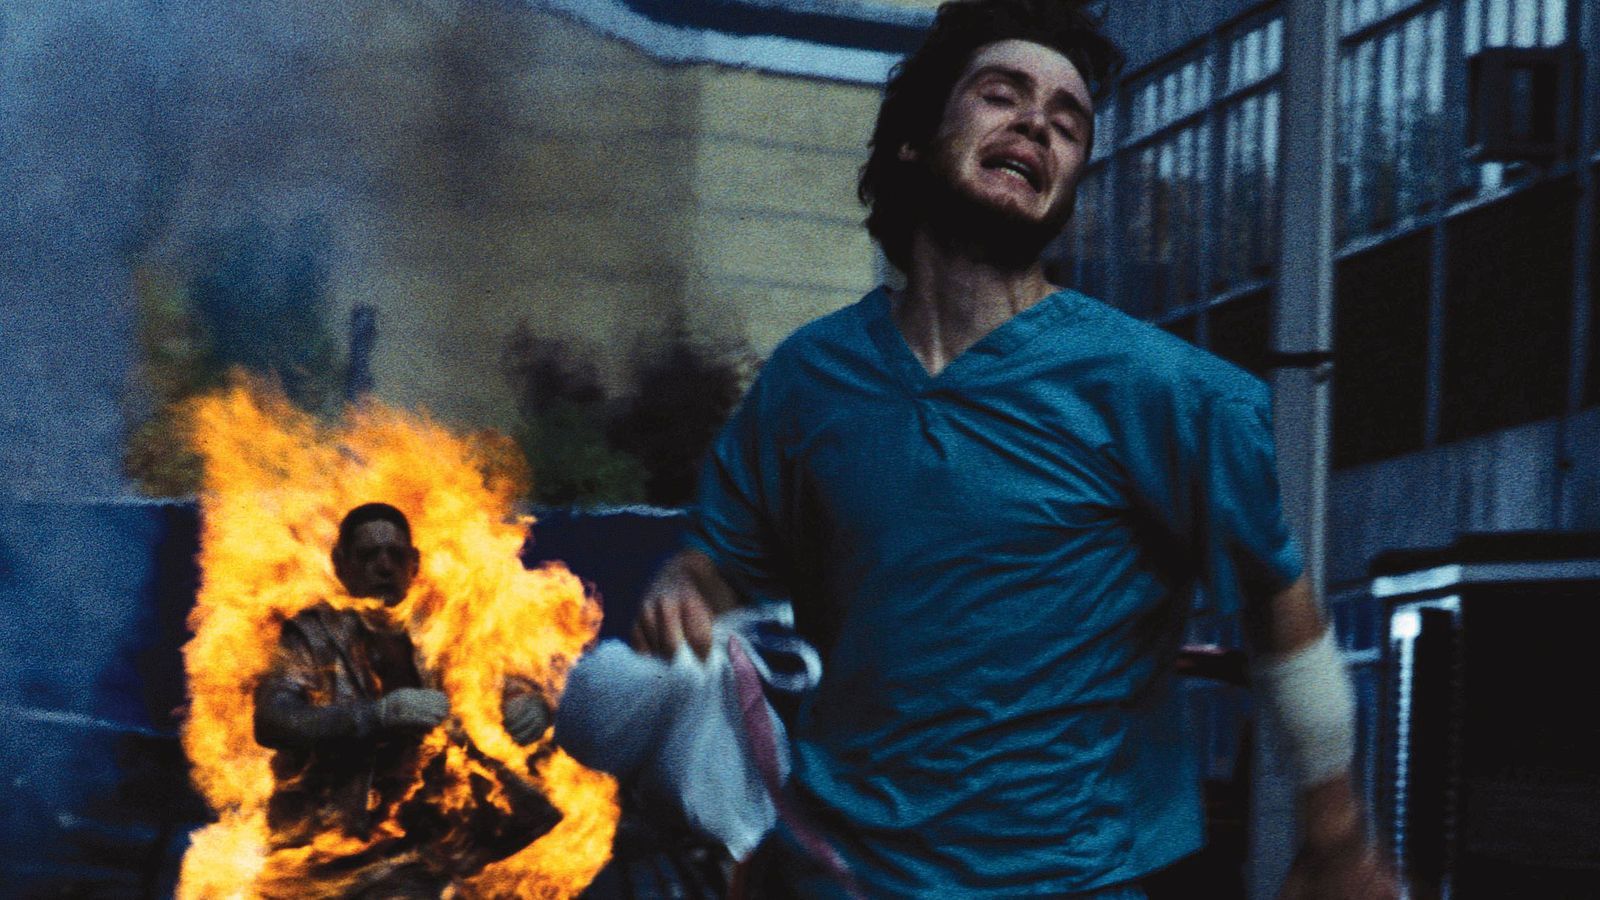 Zombie classic 28 Days Later set for new sequel under Danny Boyle and Alex Garland